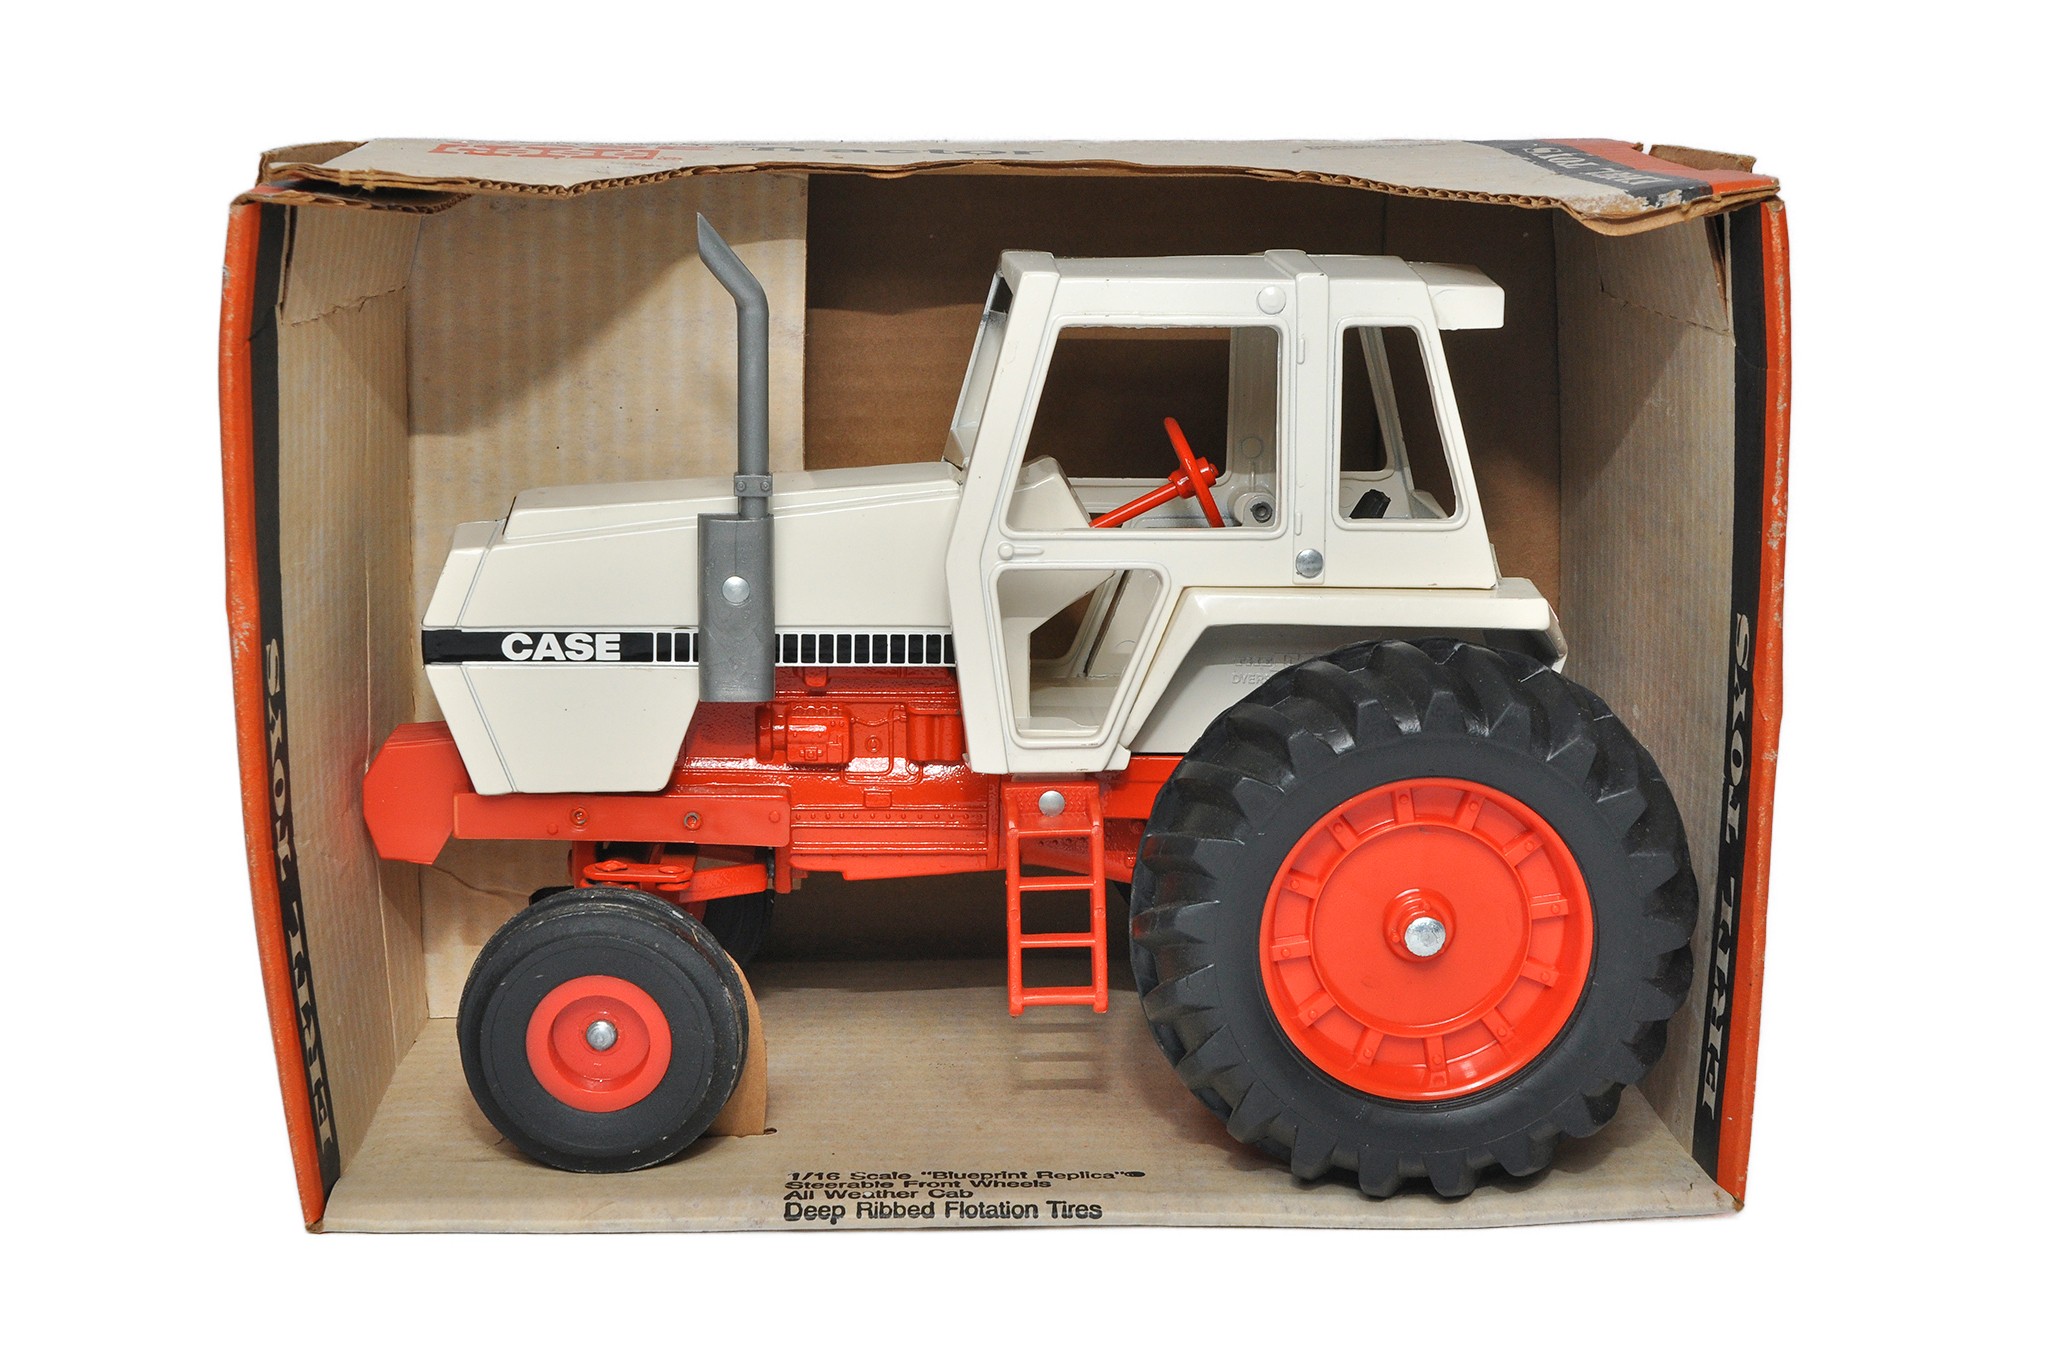 Ertl 1/16 farm model issue comprising No. 269 Case 2590 Tractor. Looks to be excellent in very